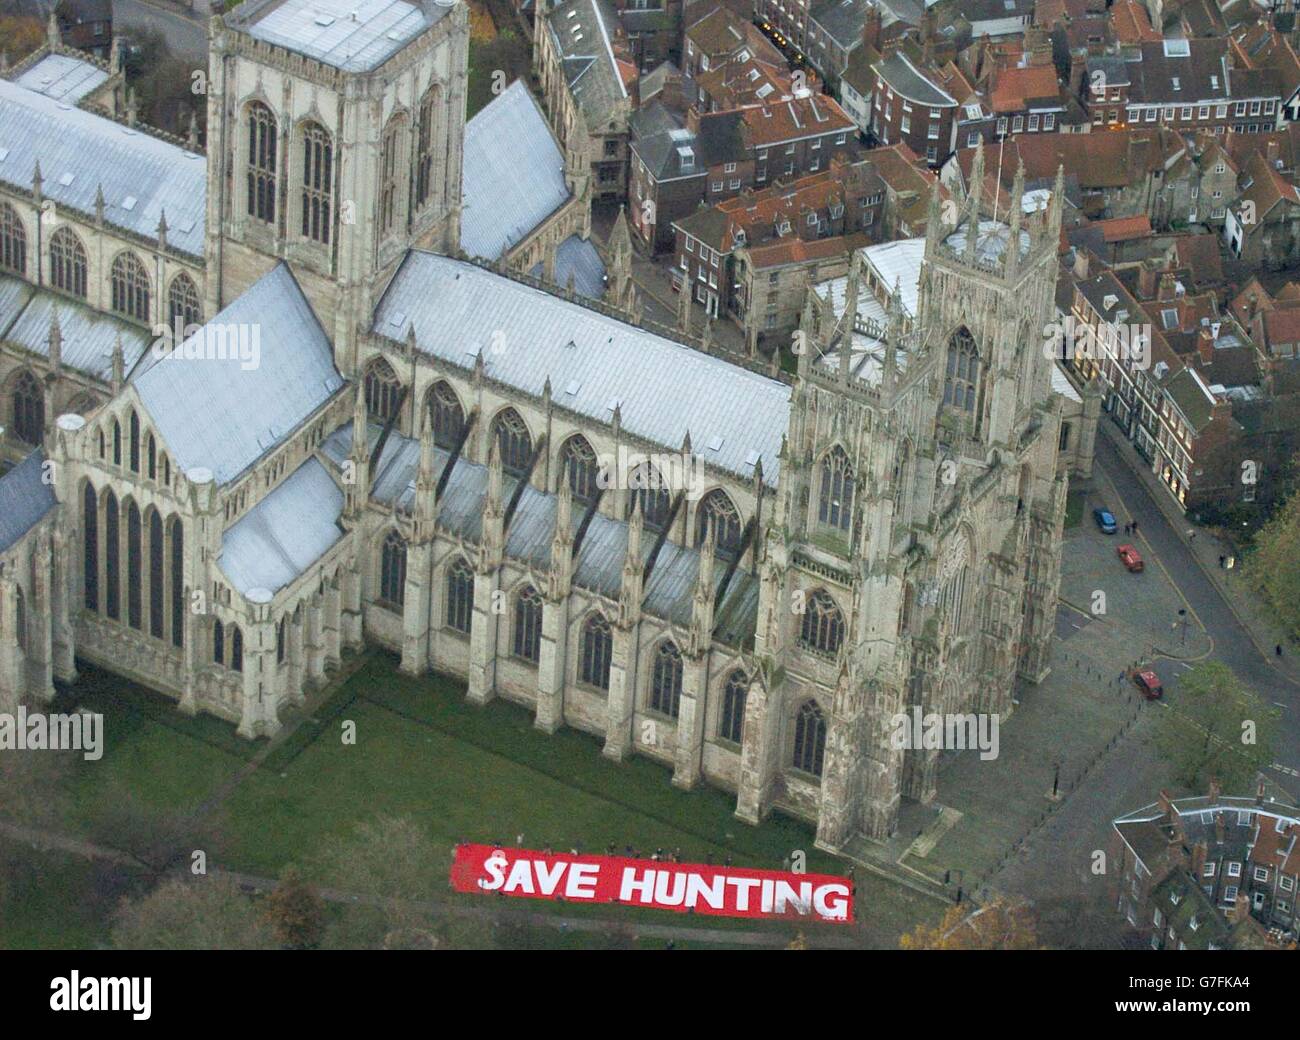 Hunt supporters place a banner in the gardens of York Minster after MPs backed an outright ban Tuesday evening. If peers reject the ban then the Government is expected to use the Parliament Act to force it through. A compromise to allow foxhunting under licence was overwhelmingly rejected in the Commons. Stock Photo